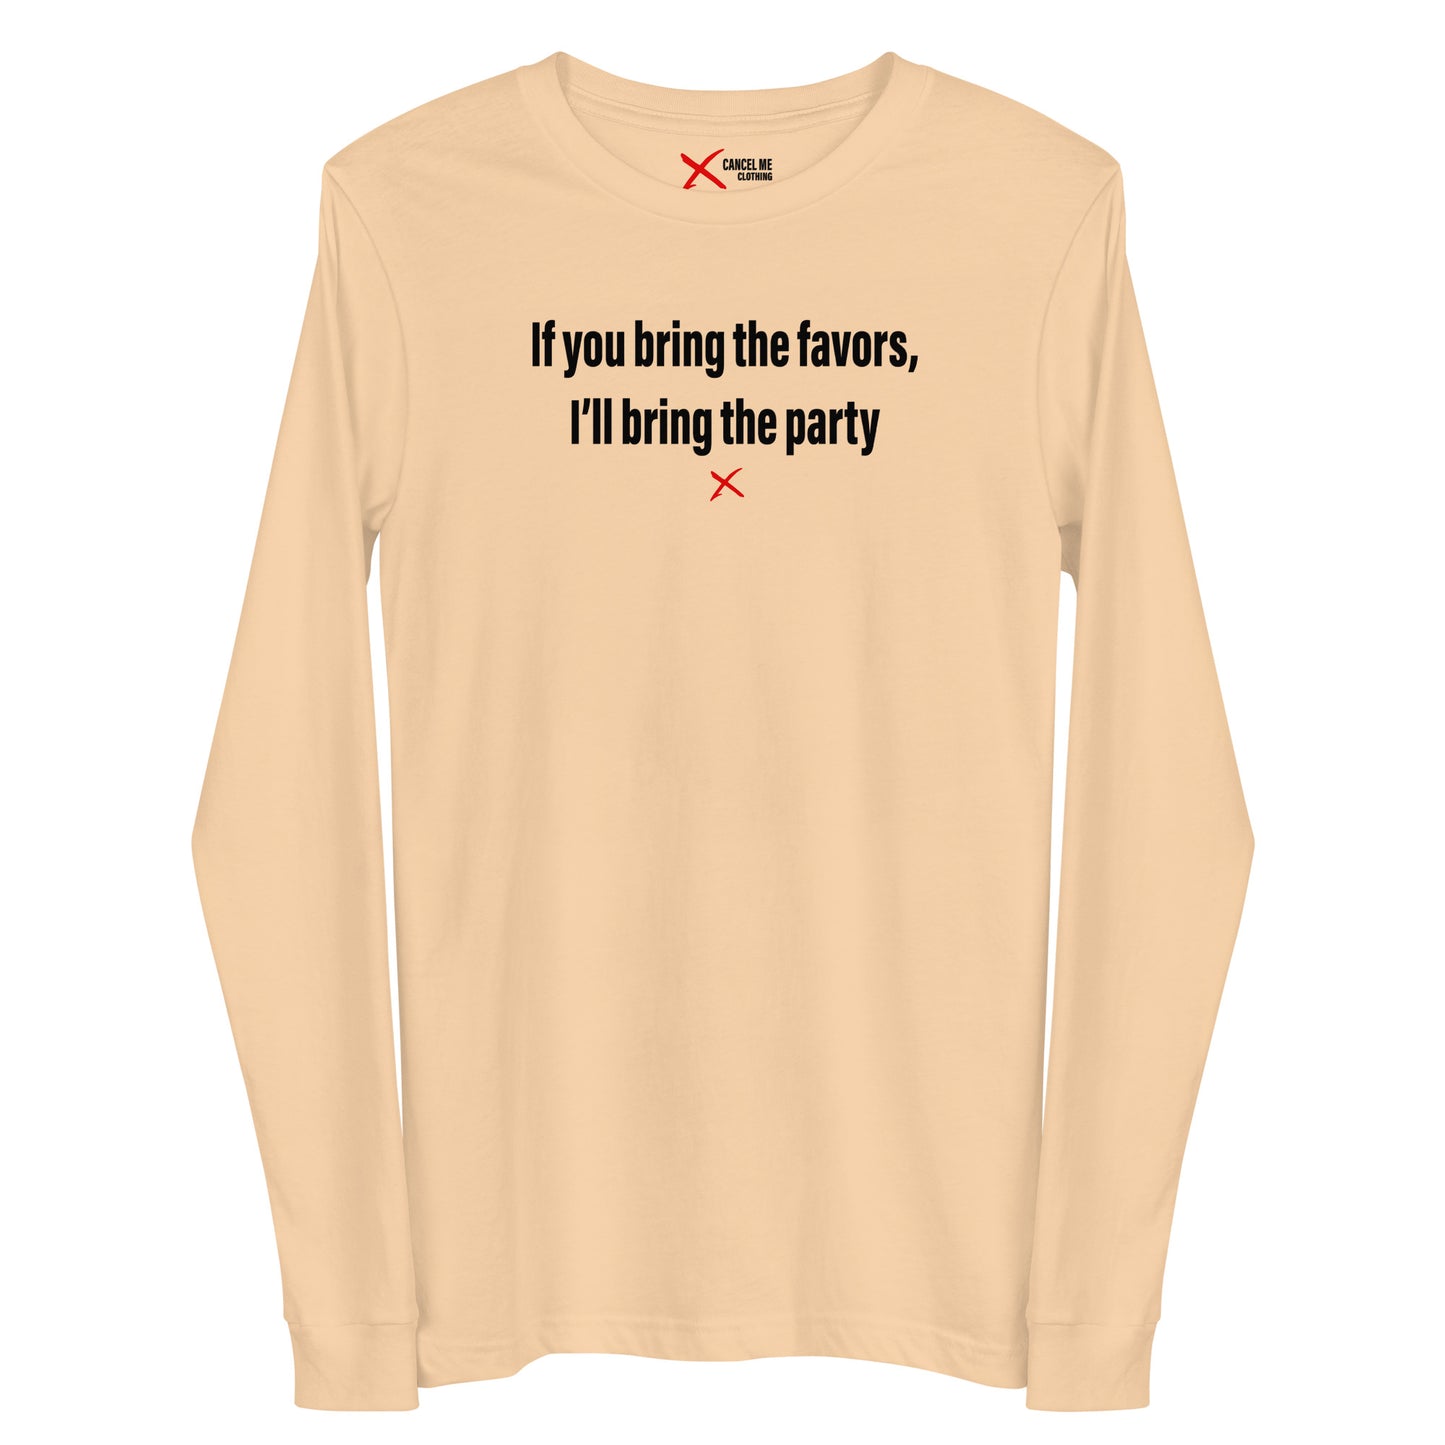 If you bring the favors, I'll bring the party - Longsleeve